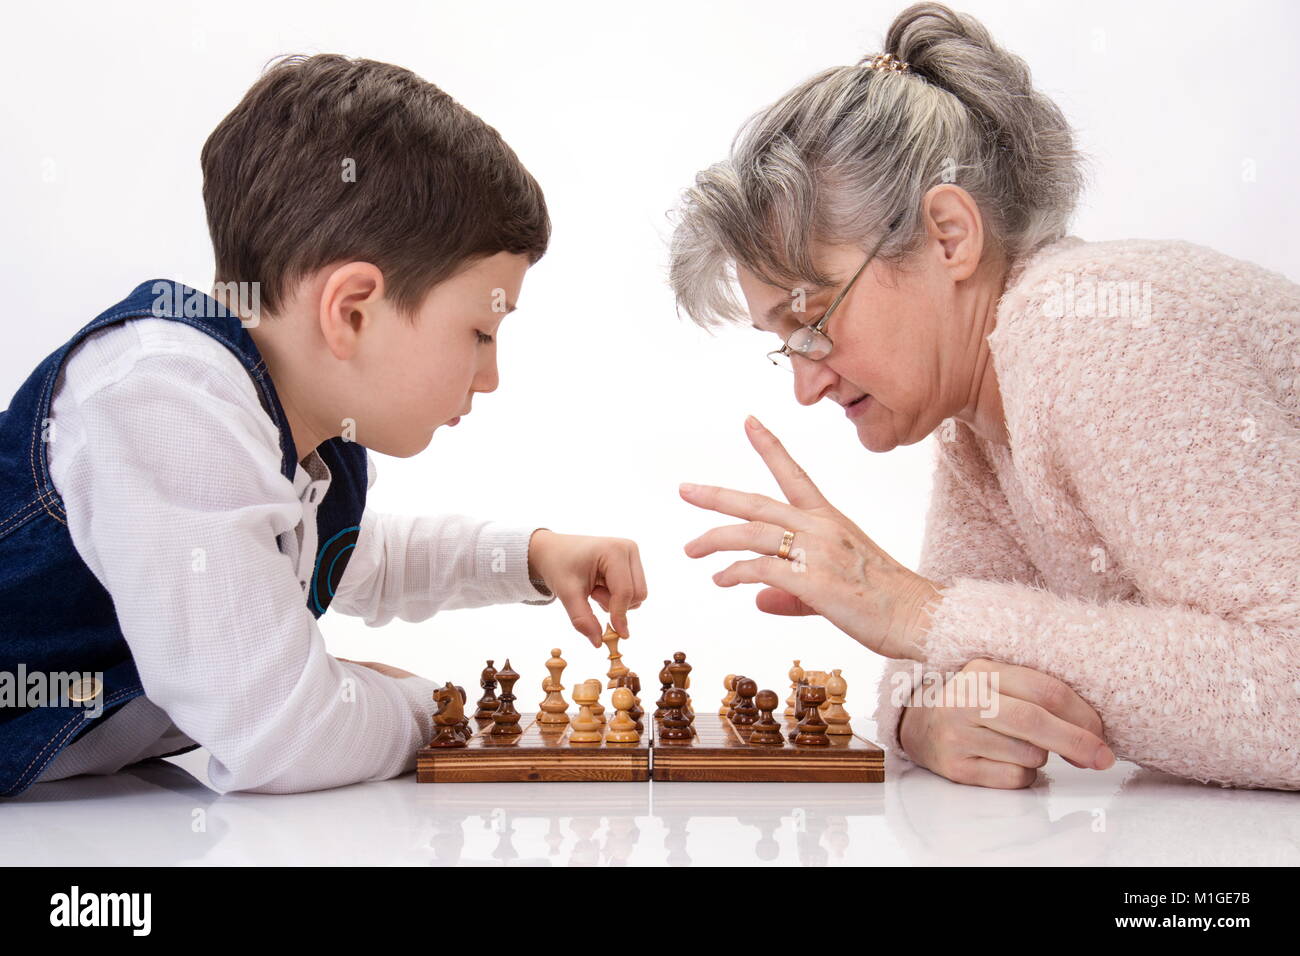 Grandma and nephew face to face playing chess Stock Photo